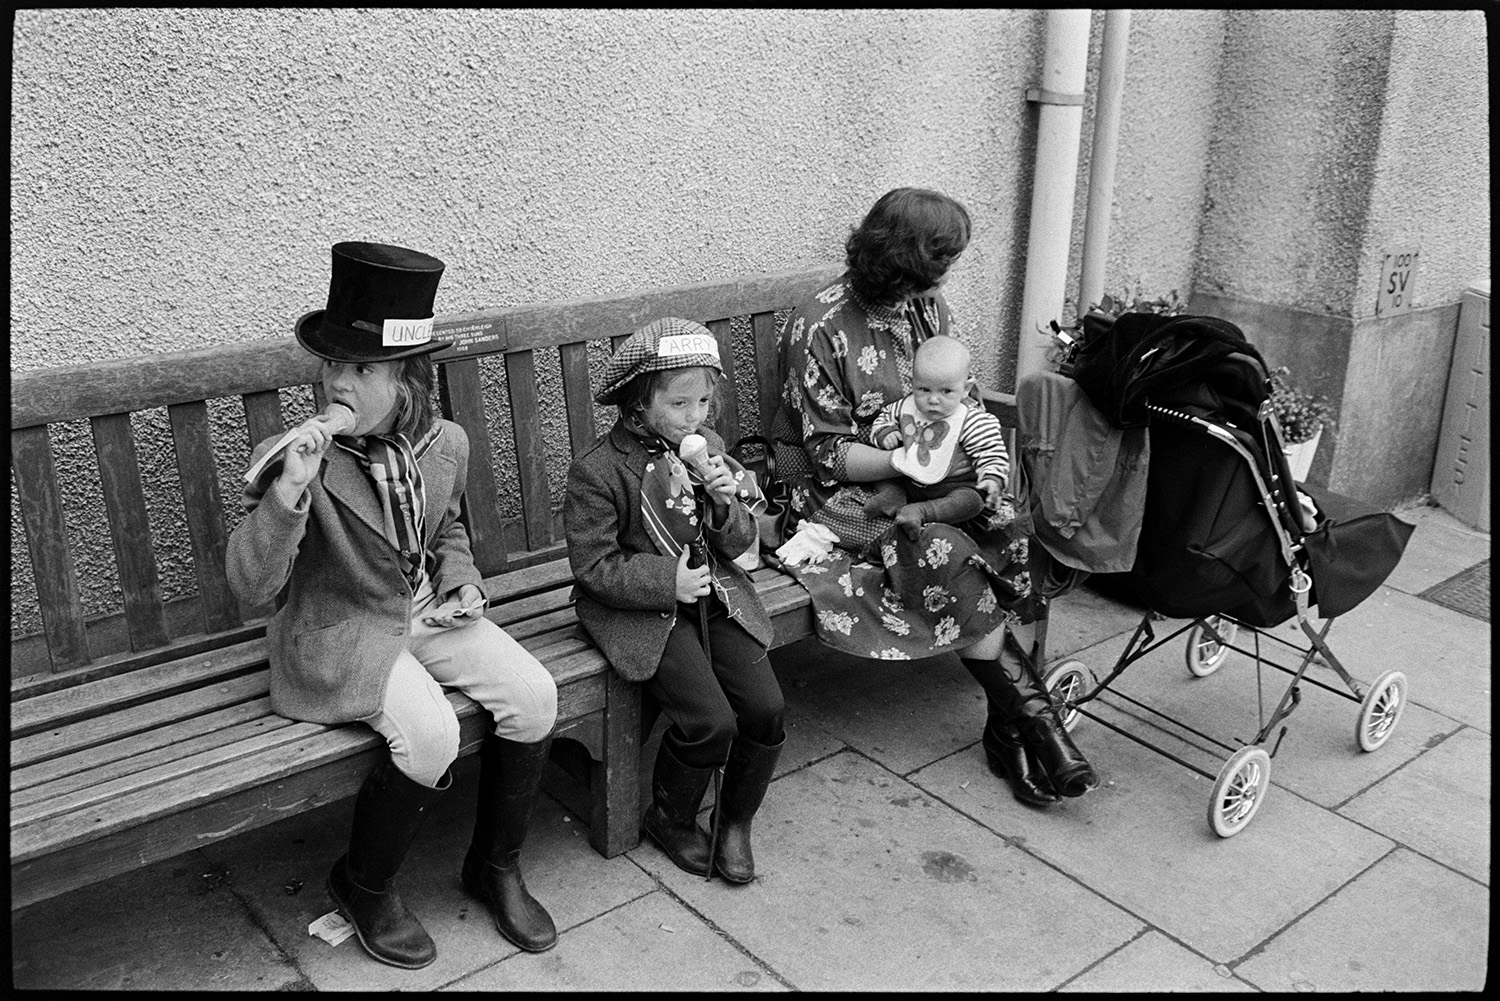 Fancy dress parade with brass band, going home afterwards. 
[A woman with two children in fancy dress, from the 'Widecombe Fair' entry, sat on a bench eating ice creams at Chulmleigh Fair. She is holding a baby on her lap and a pram is parked next o them.]